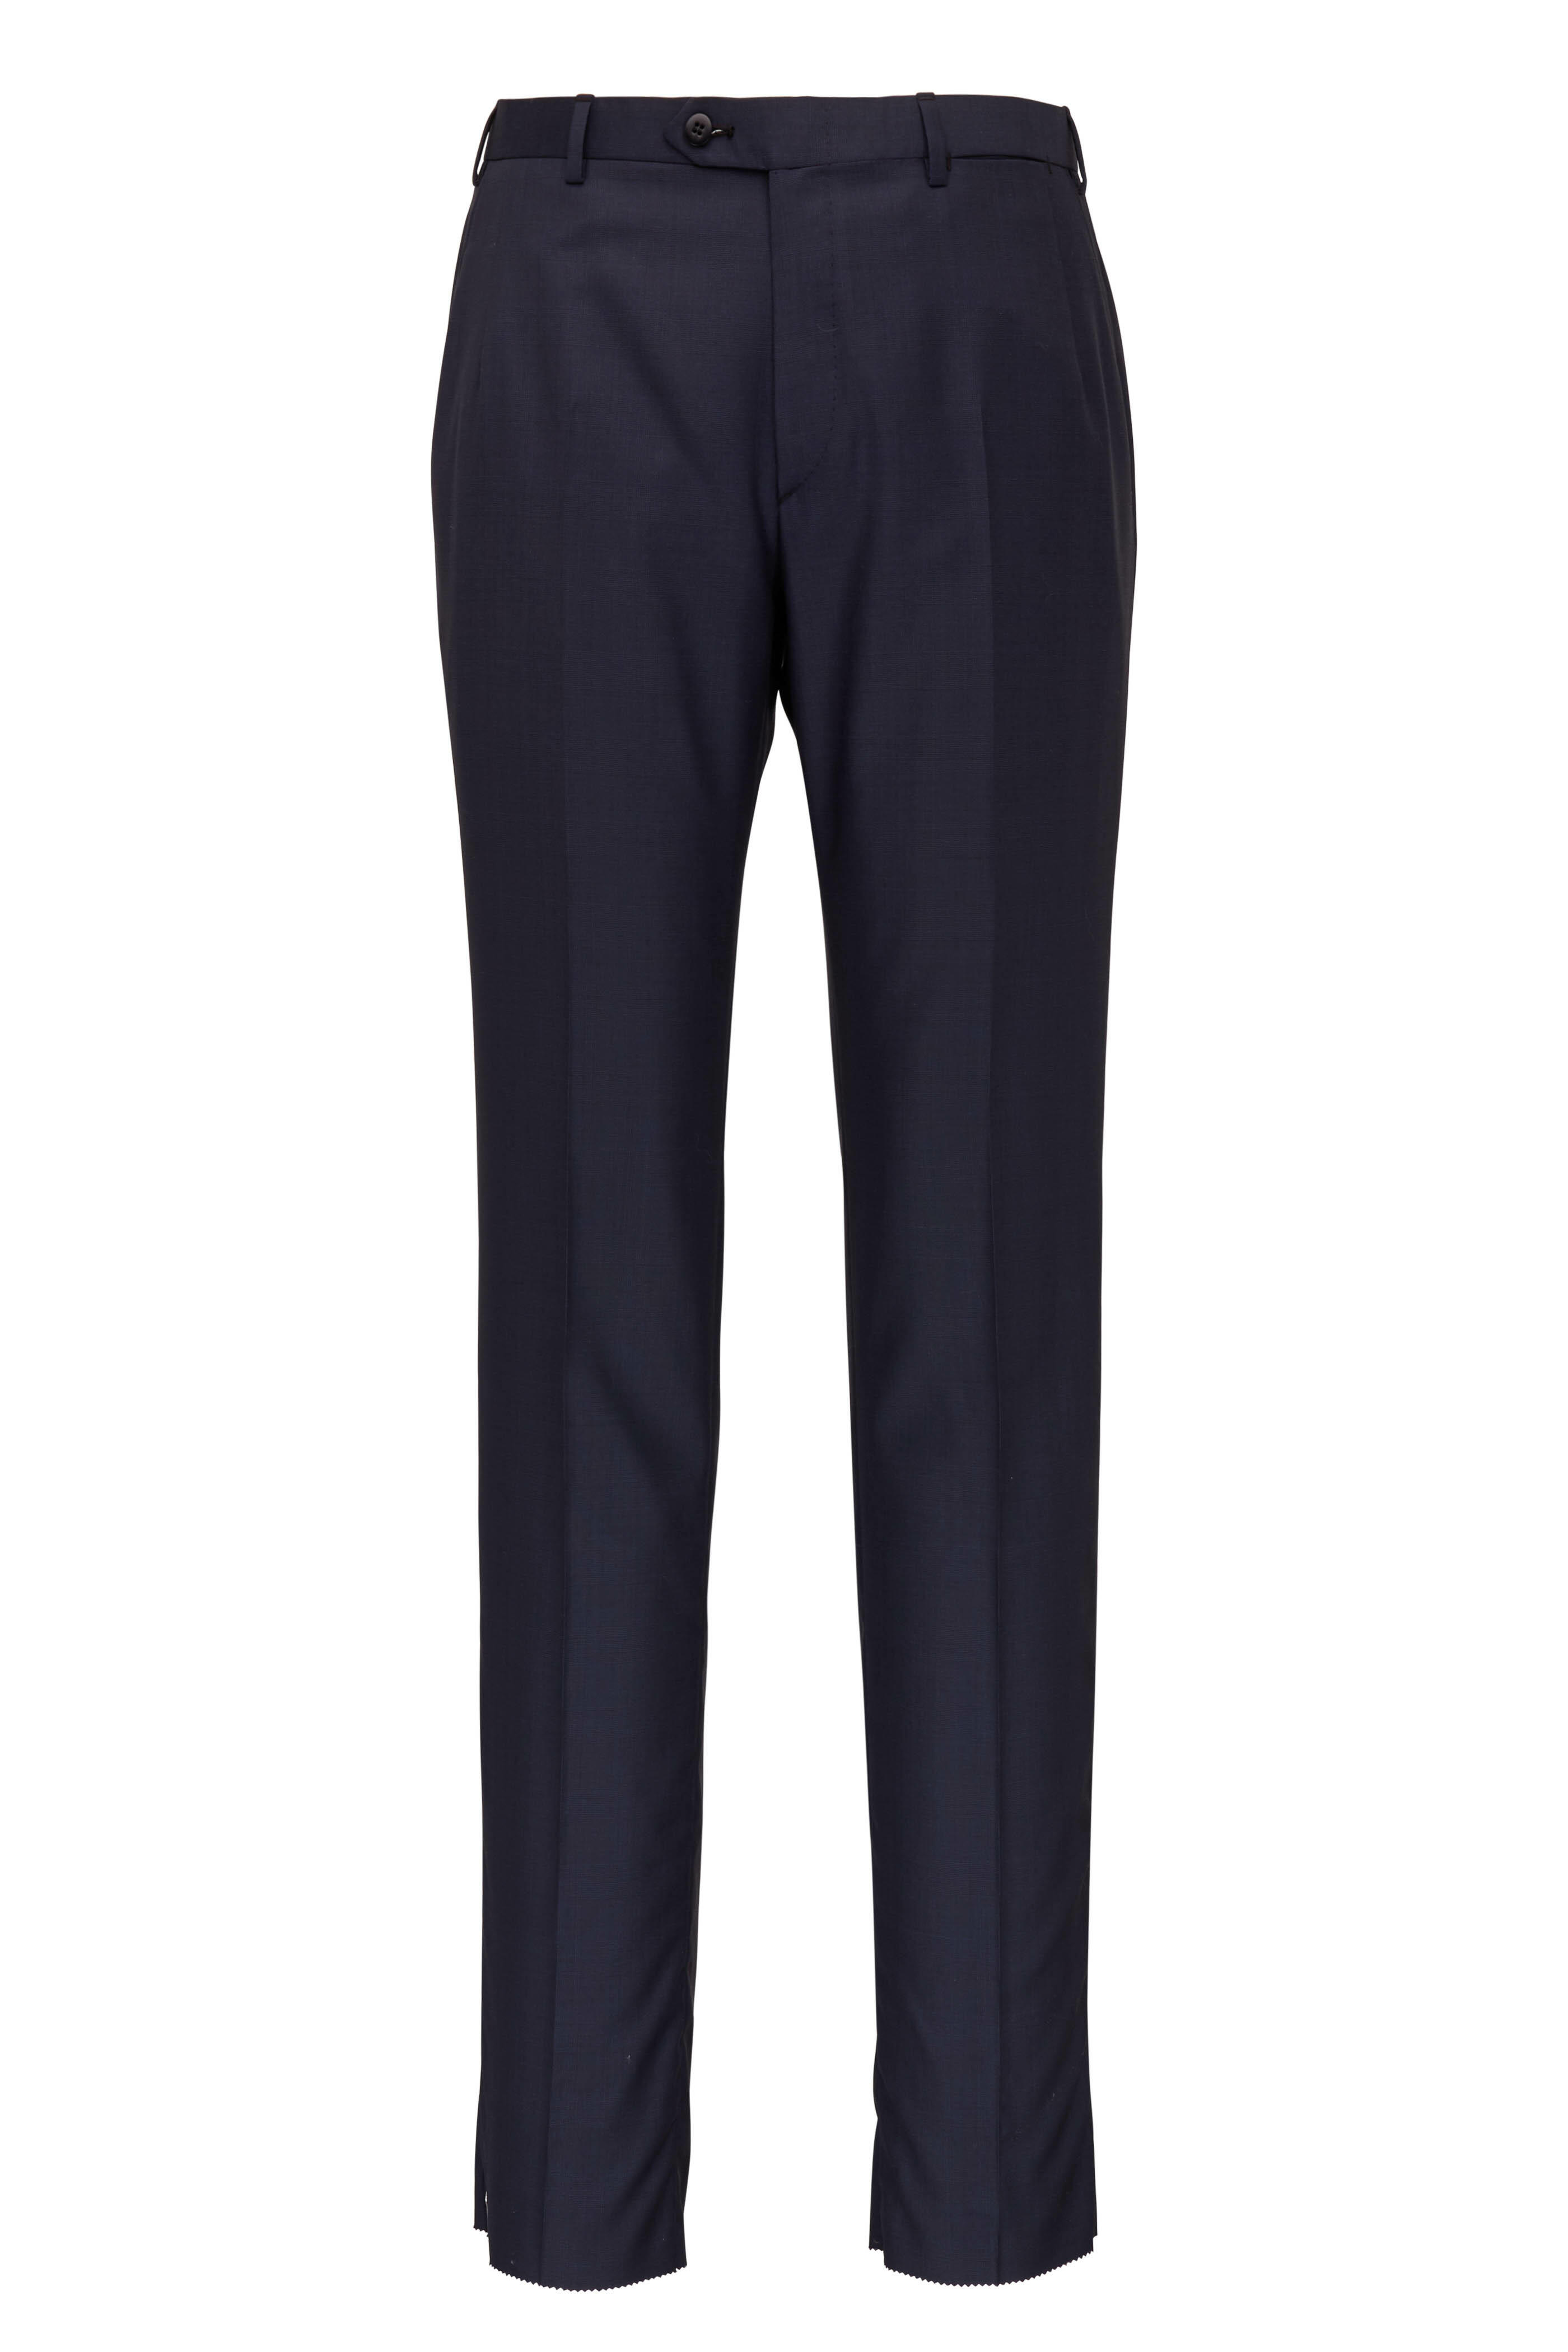 Brioni - Navy Blue Tonal Plaid Wool Suit | Mitchell Stores